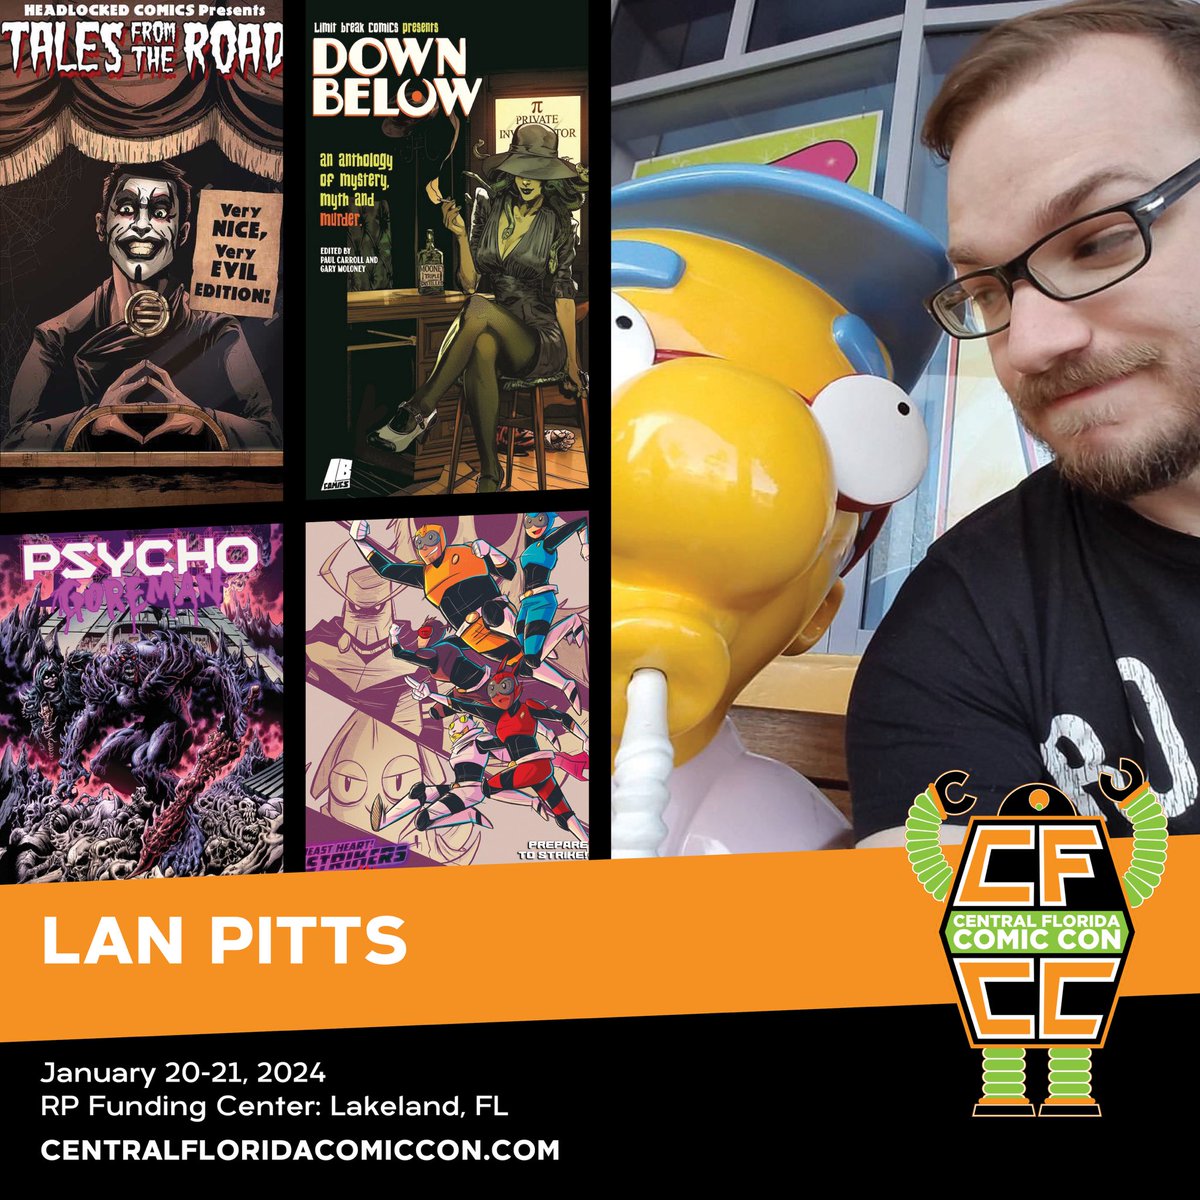 Tampa! Come see me this weekend at @CentralFlaCon. Nerd Street puts on great shows and looking forward to seeing good buds and having good times. I'll have books, merch, prints, and good convos. Come on by!